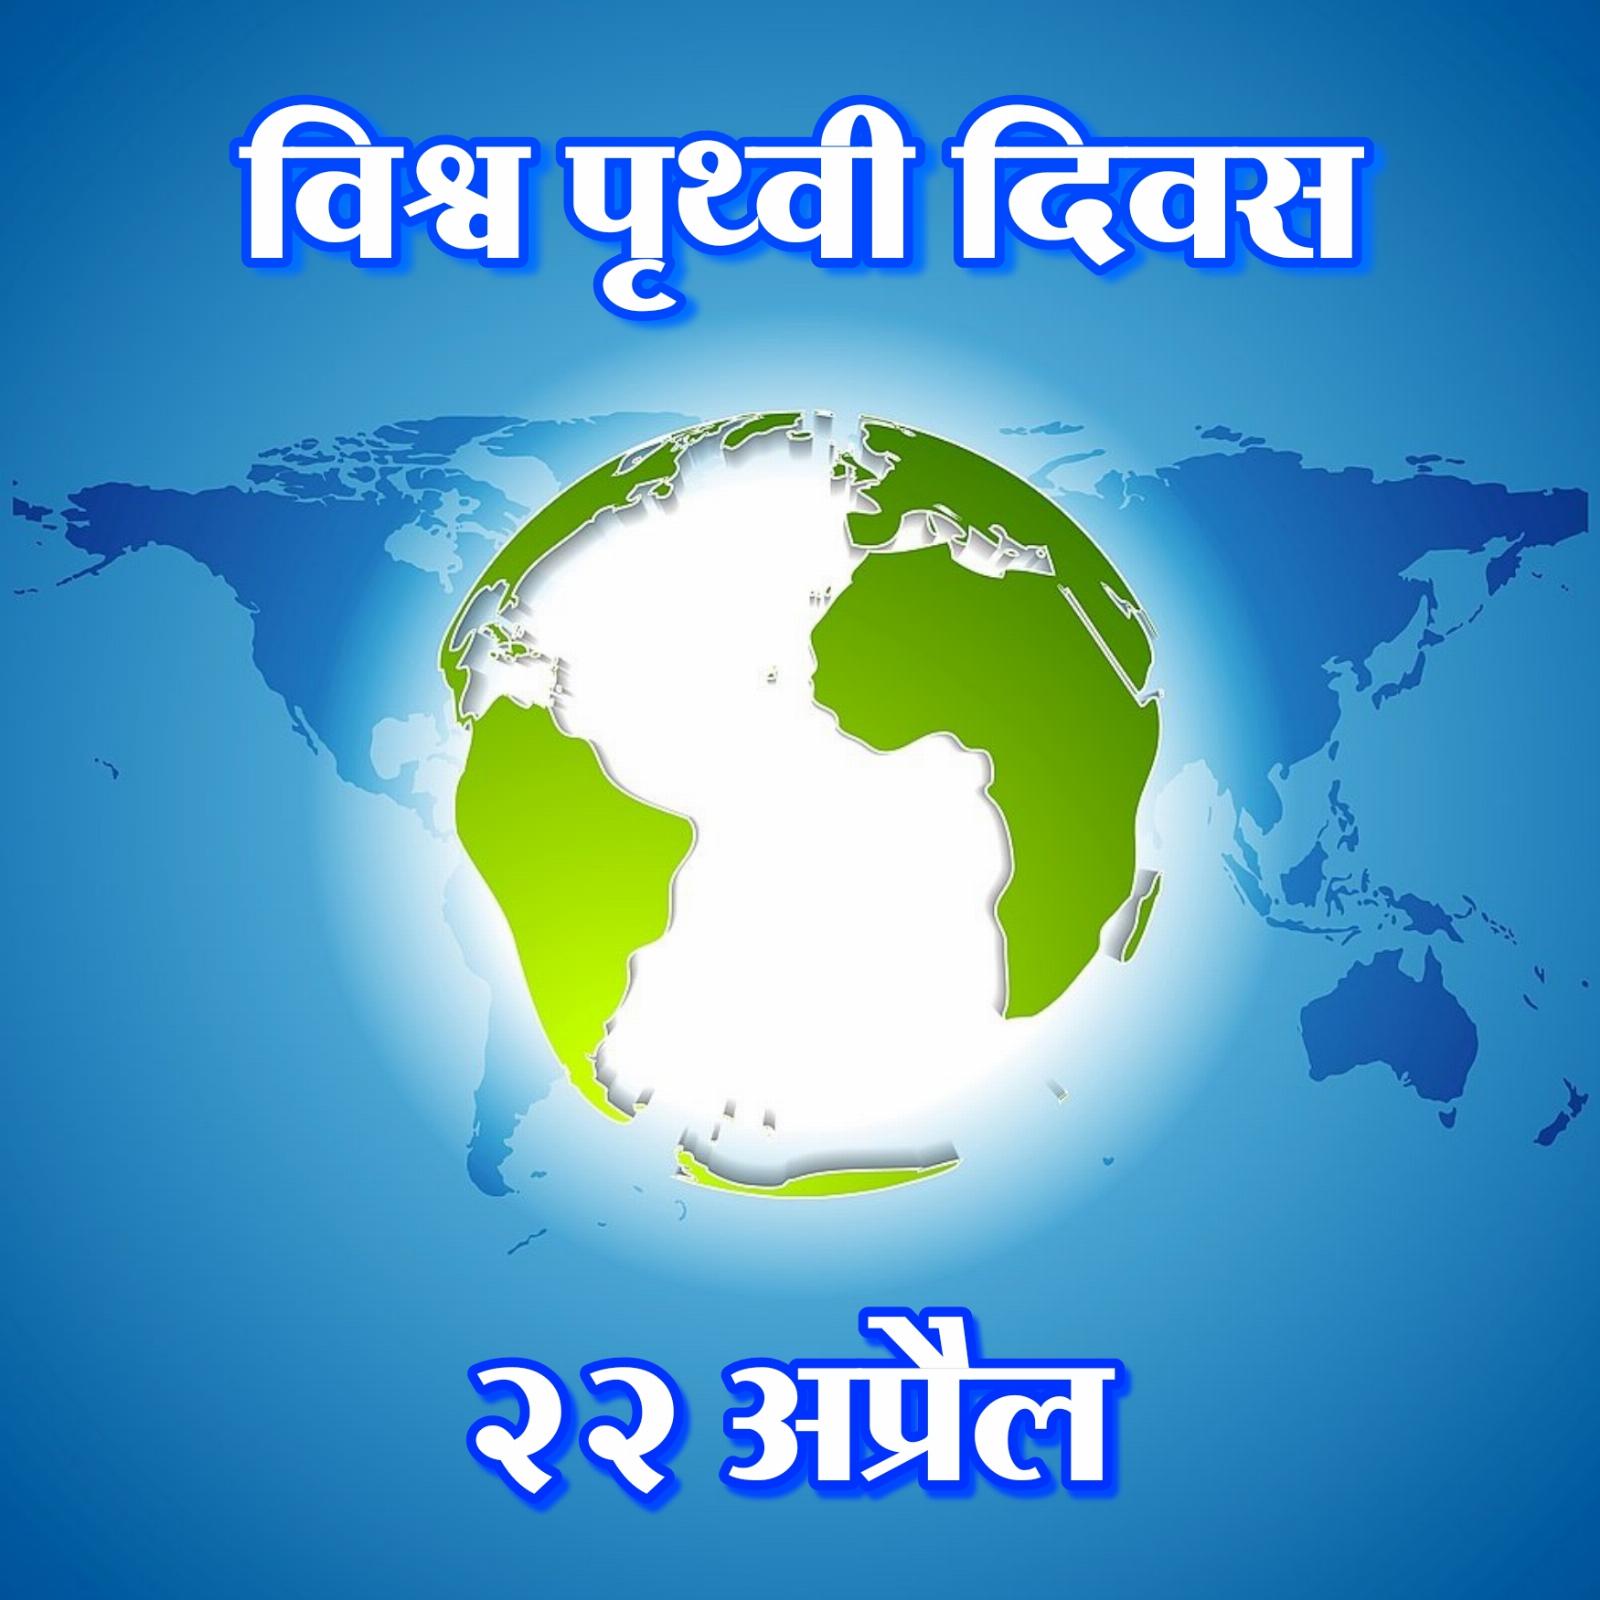 Happy Earth Day Images in Hindi